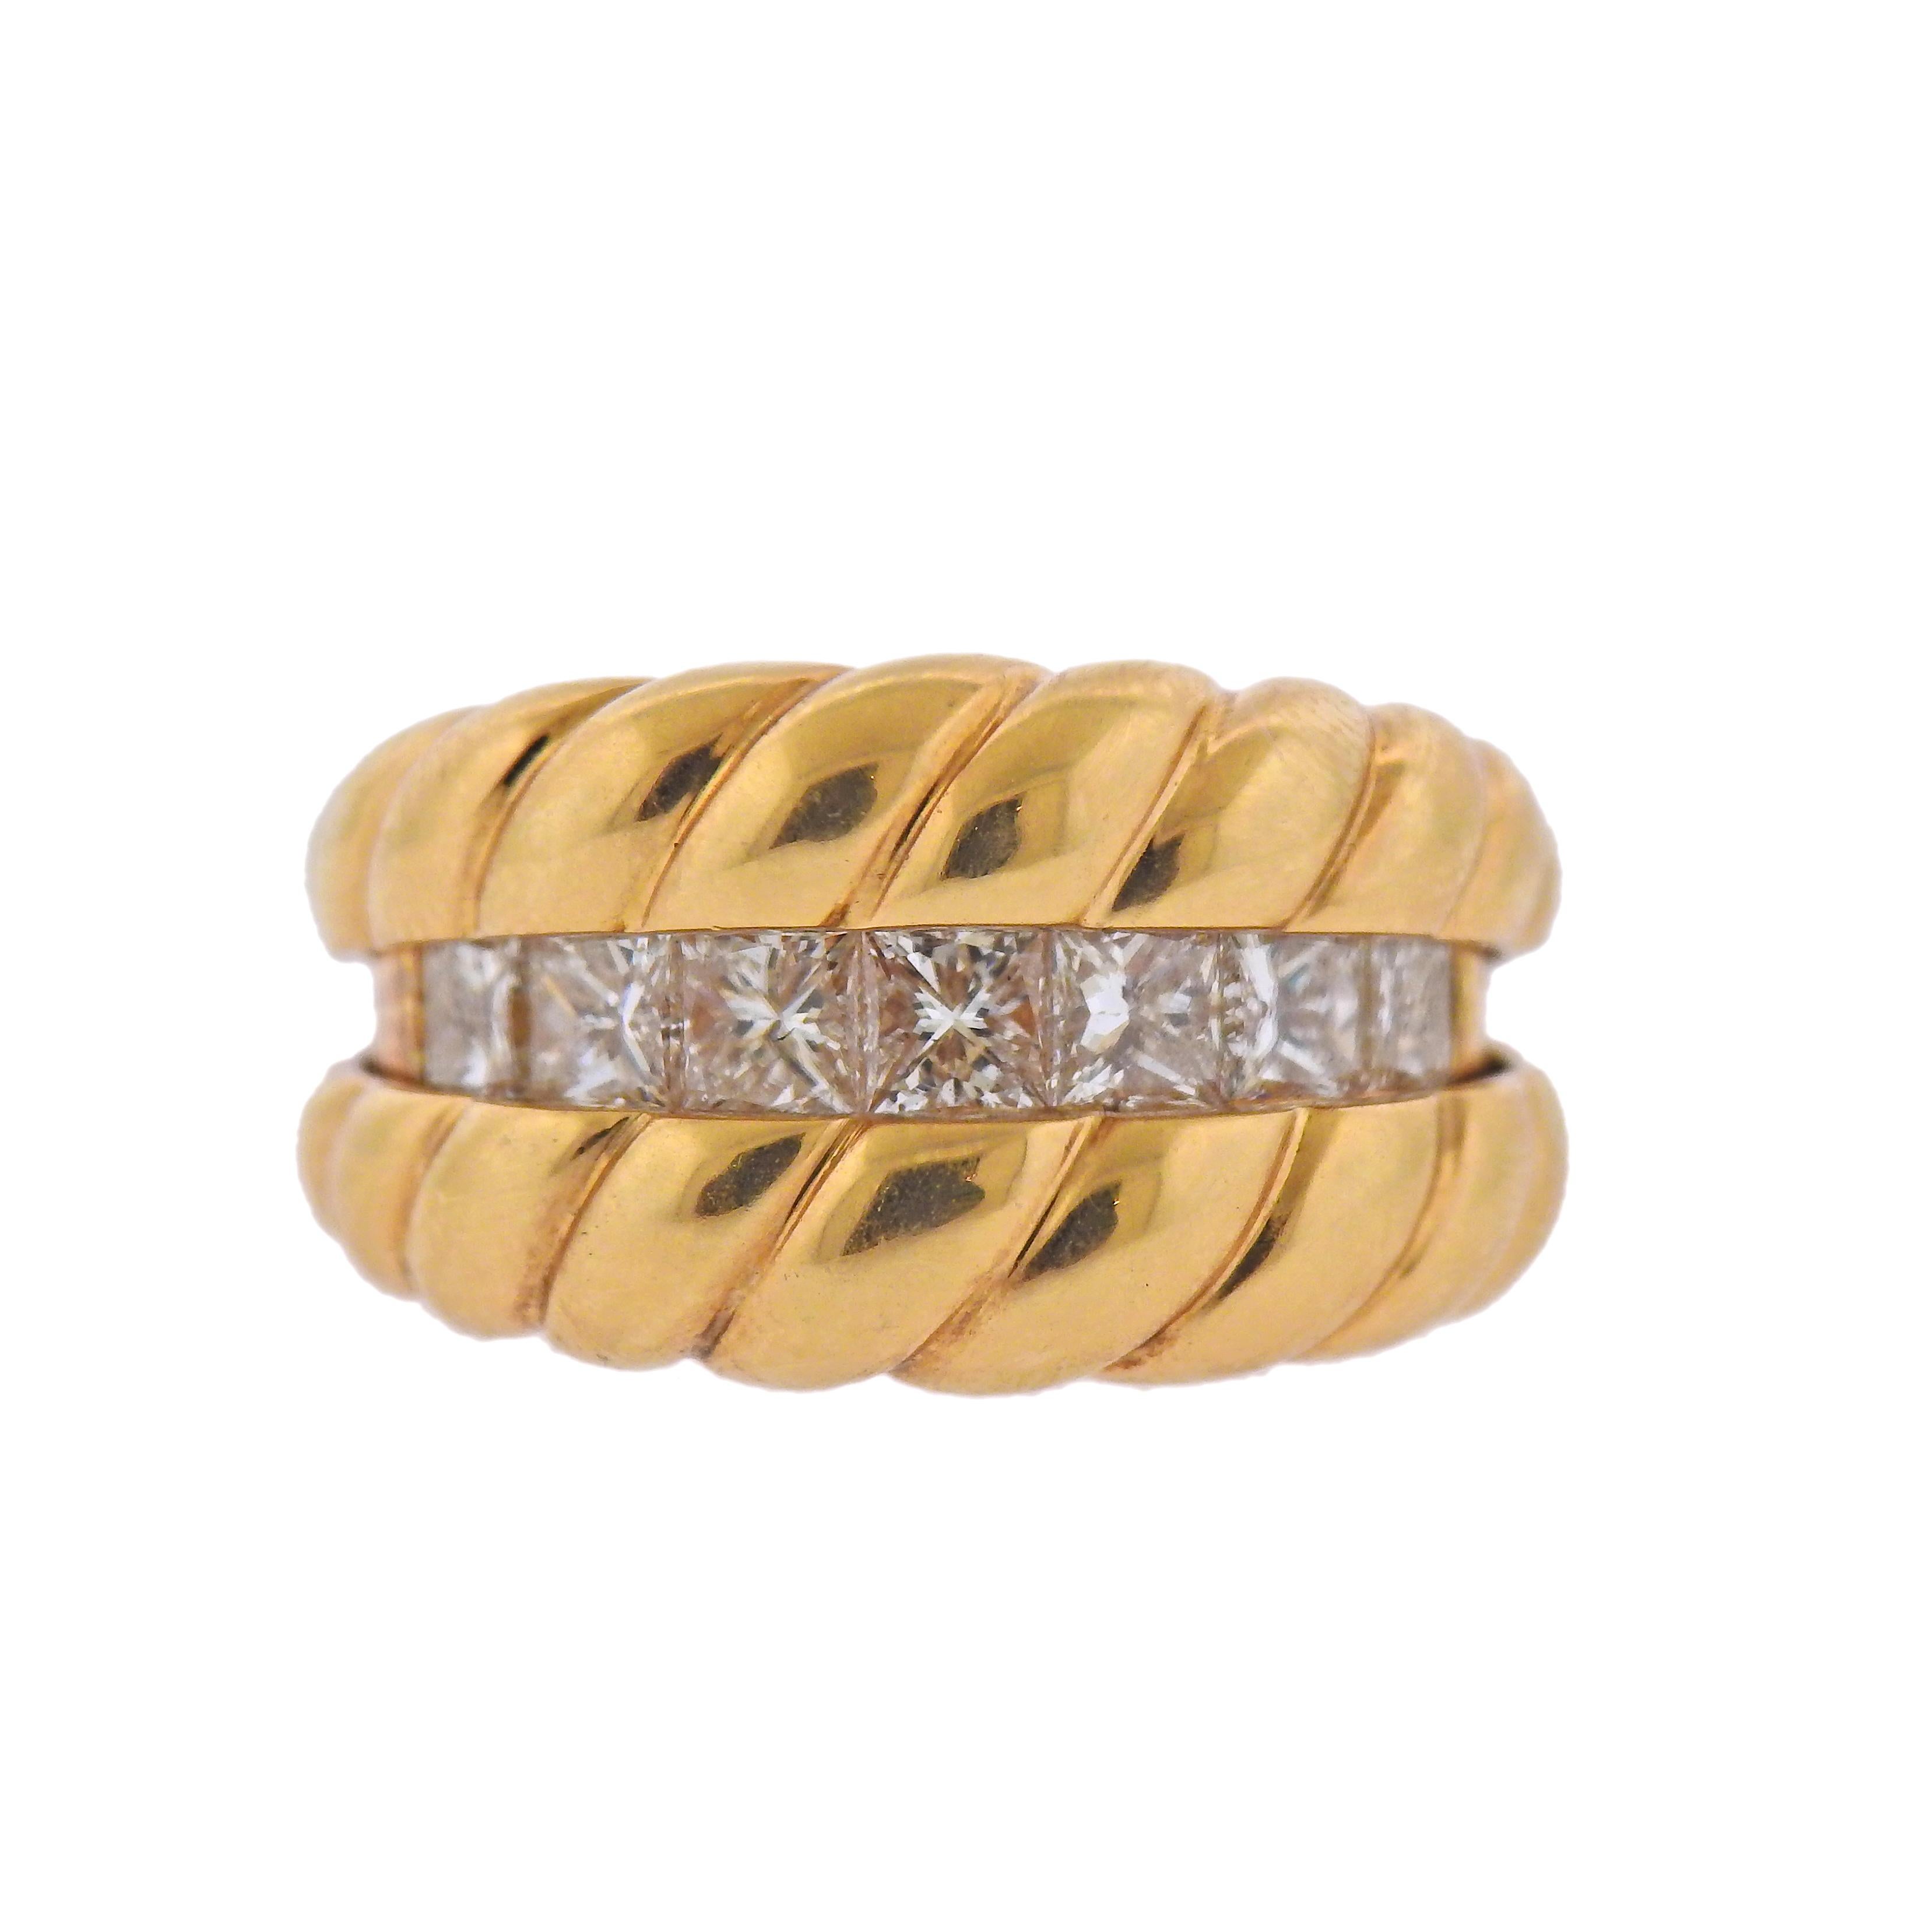 Whimsical 18k gold ring with a total of 1.75ctw in diamonds. Ring top opens and closes, revealing the diamonds. Can be worn both ways. Ring size - 6, ring top is 10.5mm (when closed). Marked: 750, D1.75ct. Weight - 14.2 grams. 